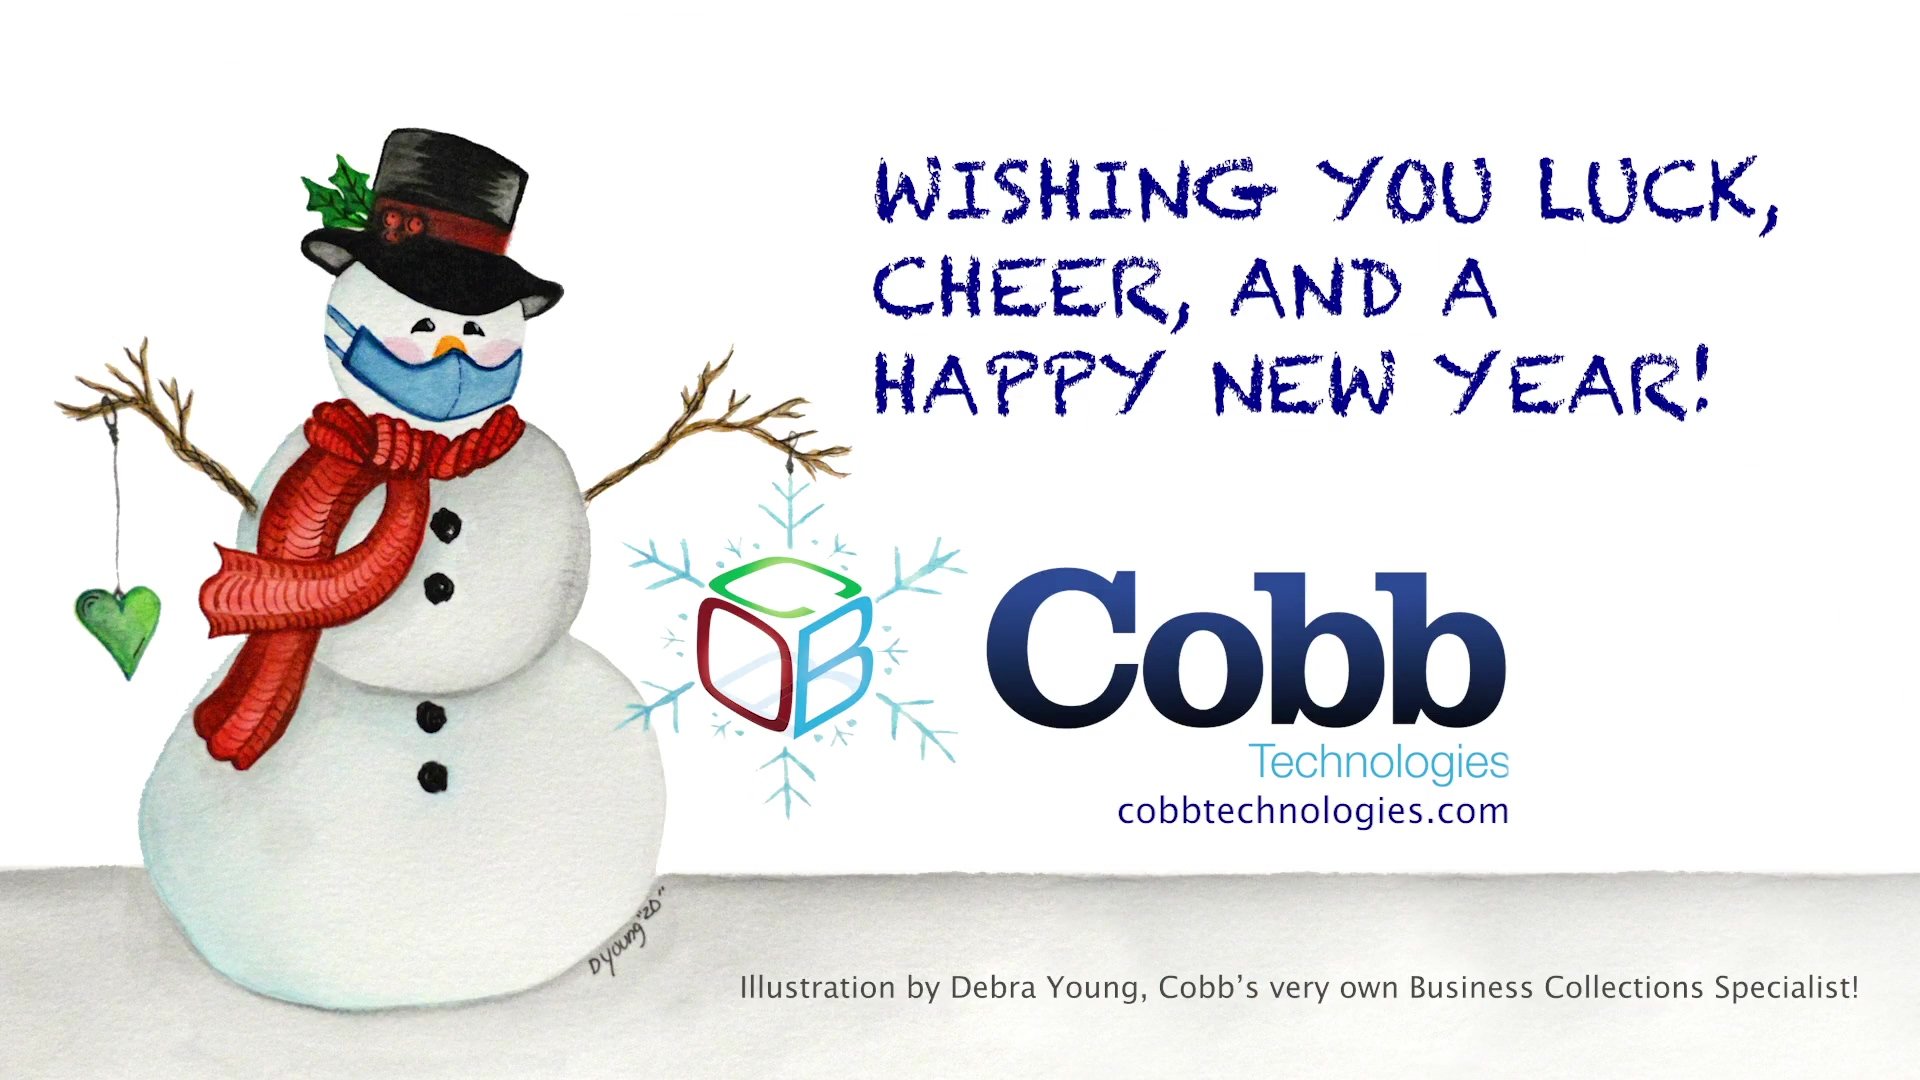 Happy Holidays From Our Cobb Family to Yours!